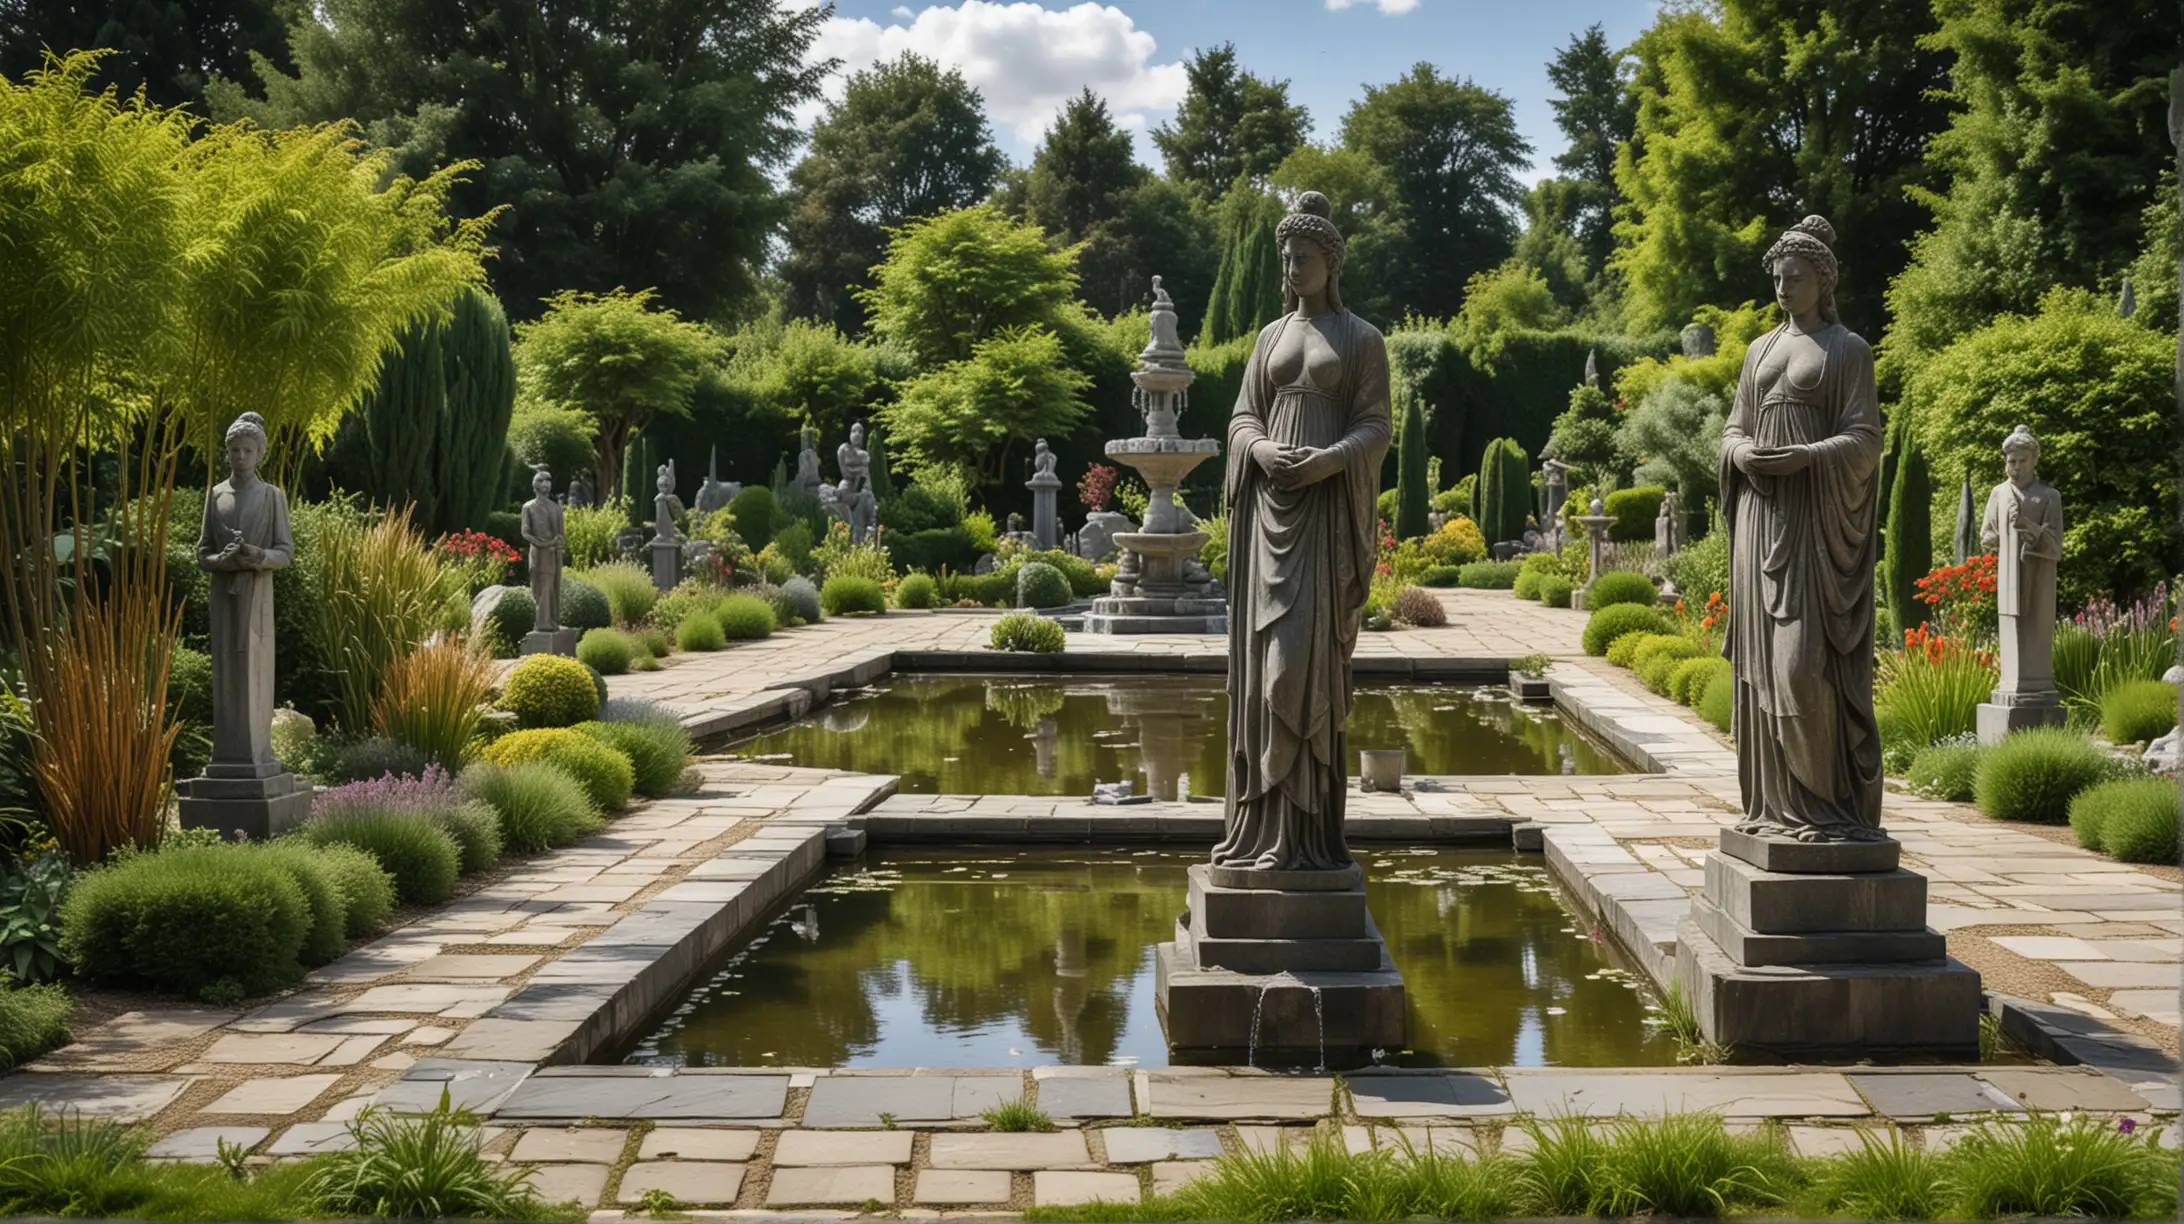 large spacious garden with tall plants and beautiful slate statues, smooth gravel, fountains, ponds, clear sky with a few small puffy clouds,

highly detailed, random details, imperfection, detailed colours hues tones patterns, saturated shadows,